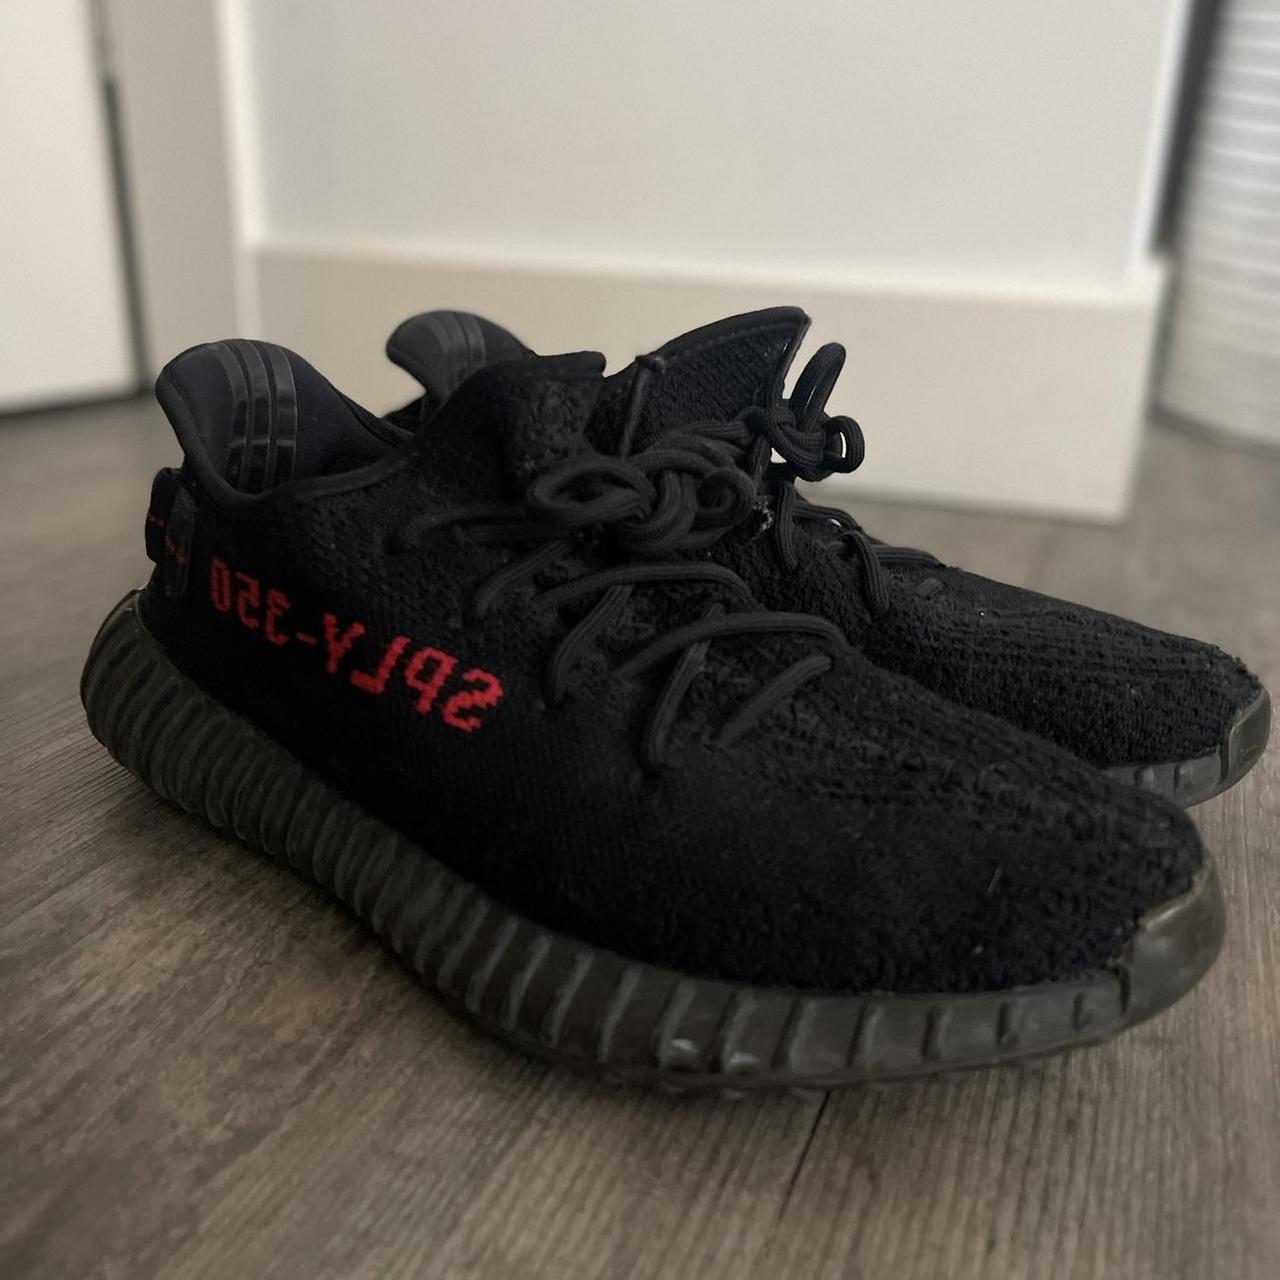 Yeezy Boost 350 V2 Bred Only visible damage is the... - Depop